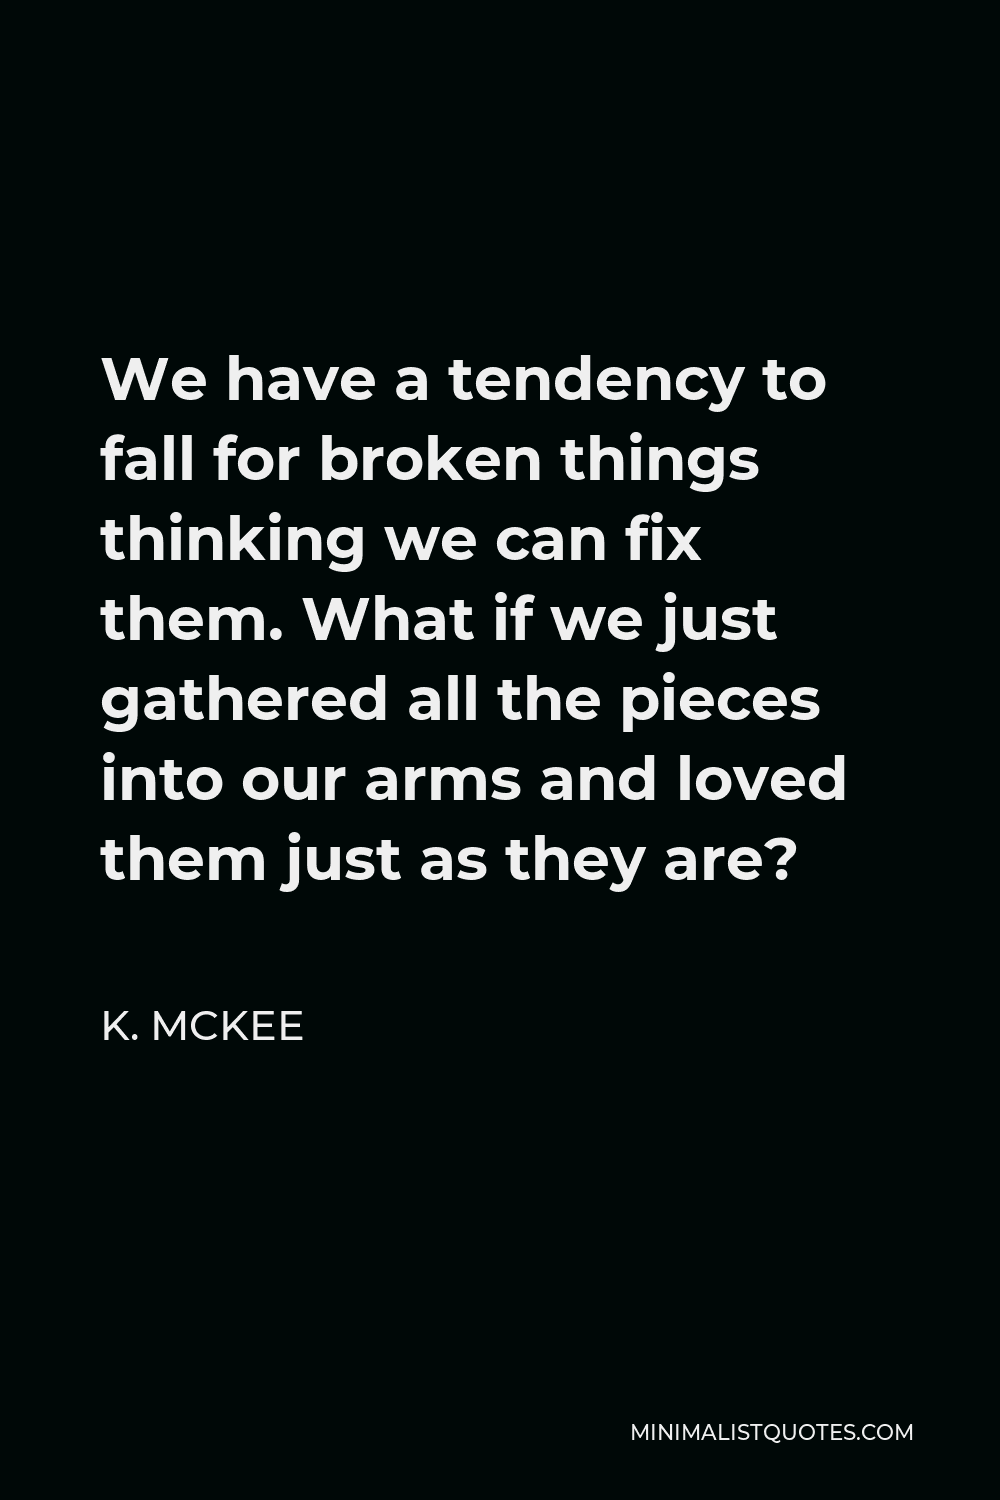 K. Mckee Quote - We have a tendency to fall for broken things thinking we can fix them. What if we just gathered all the pieces into our arms and loved them just as they are?